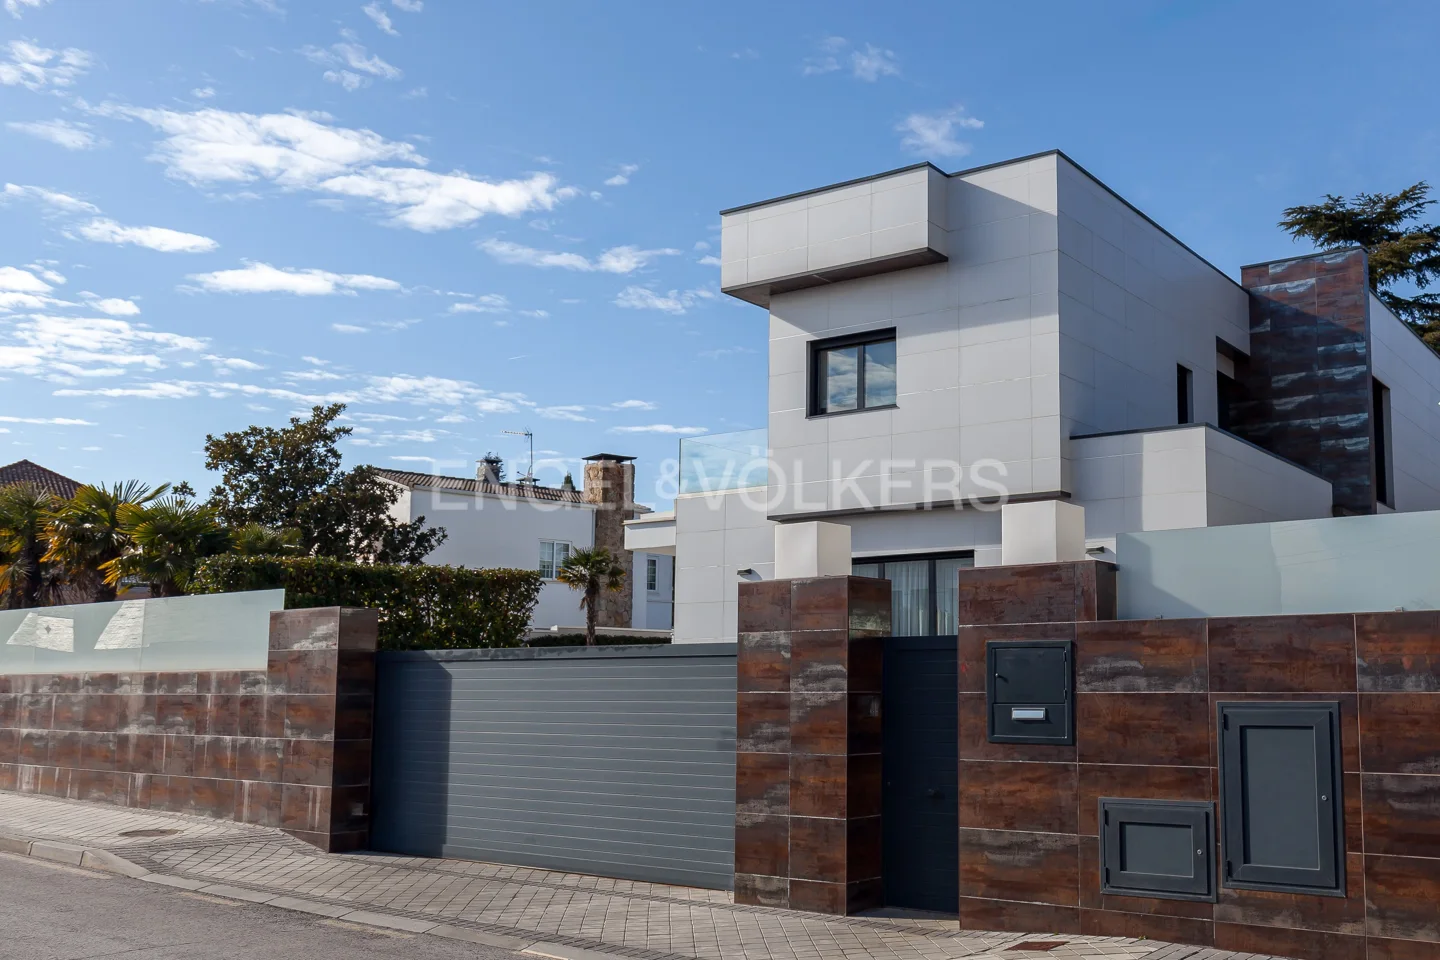 Modern and luxurious home in Las Rozas